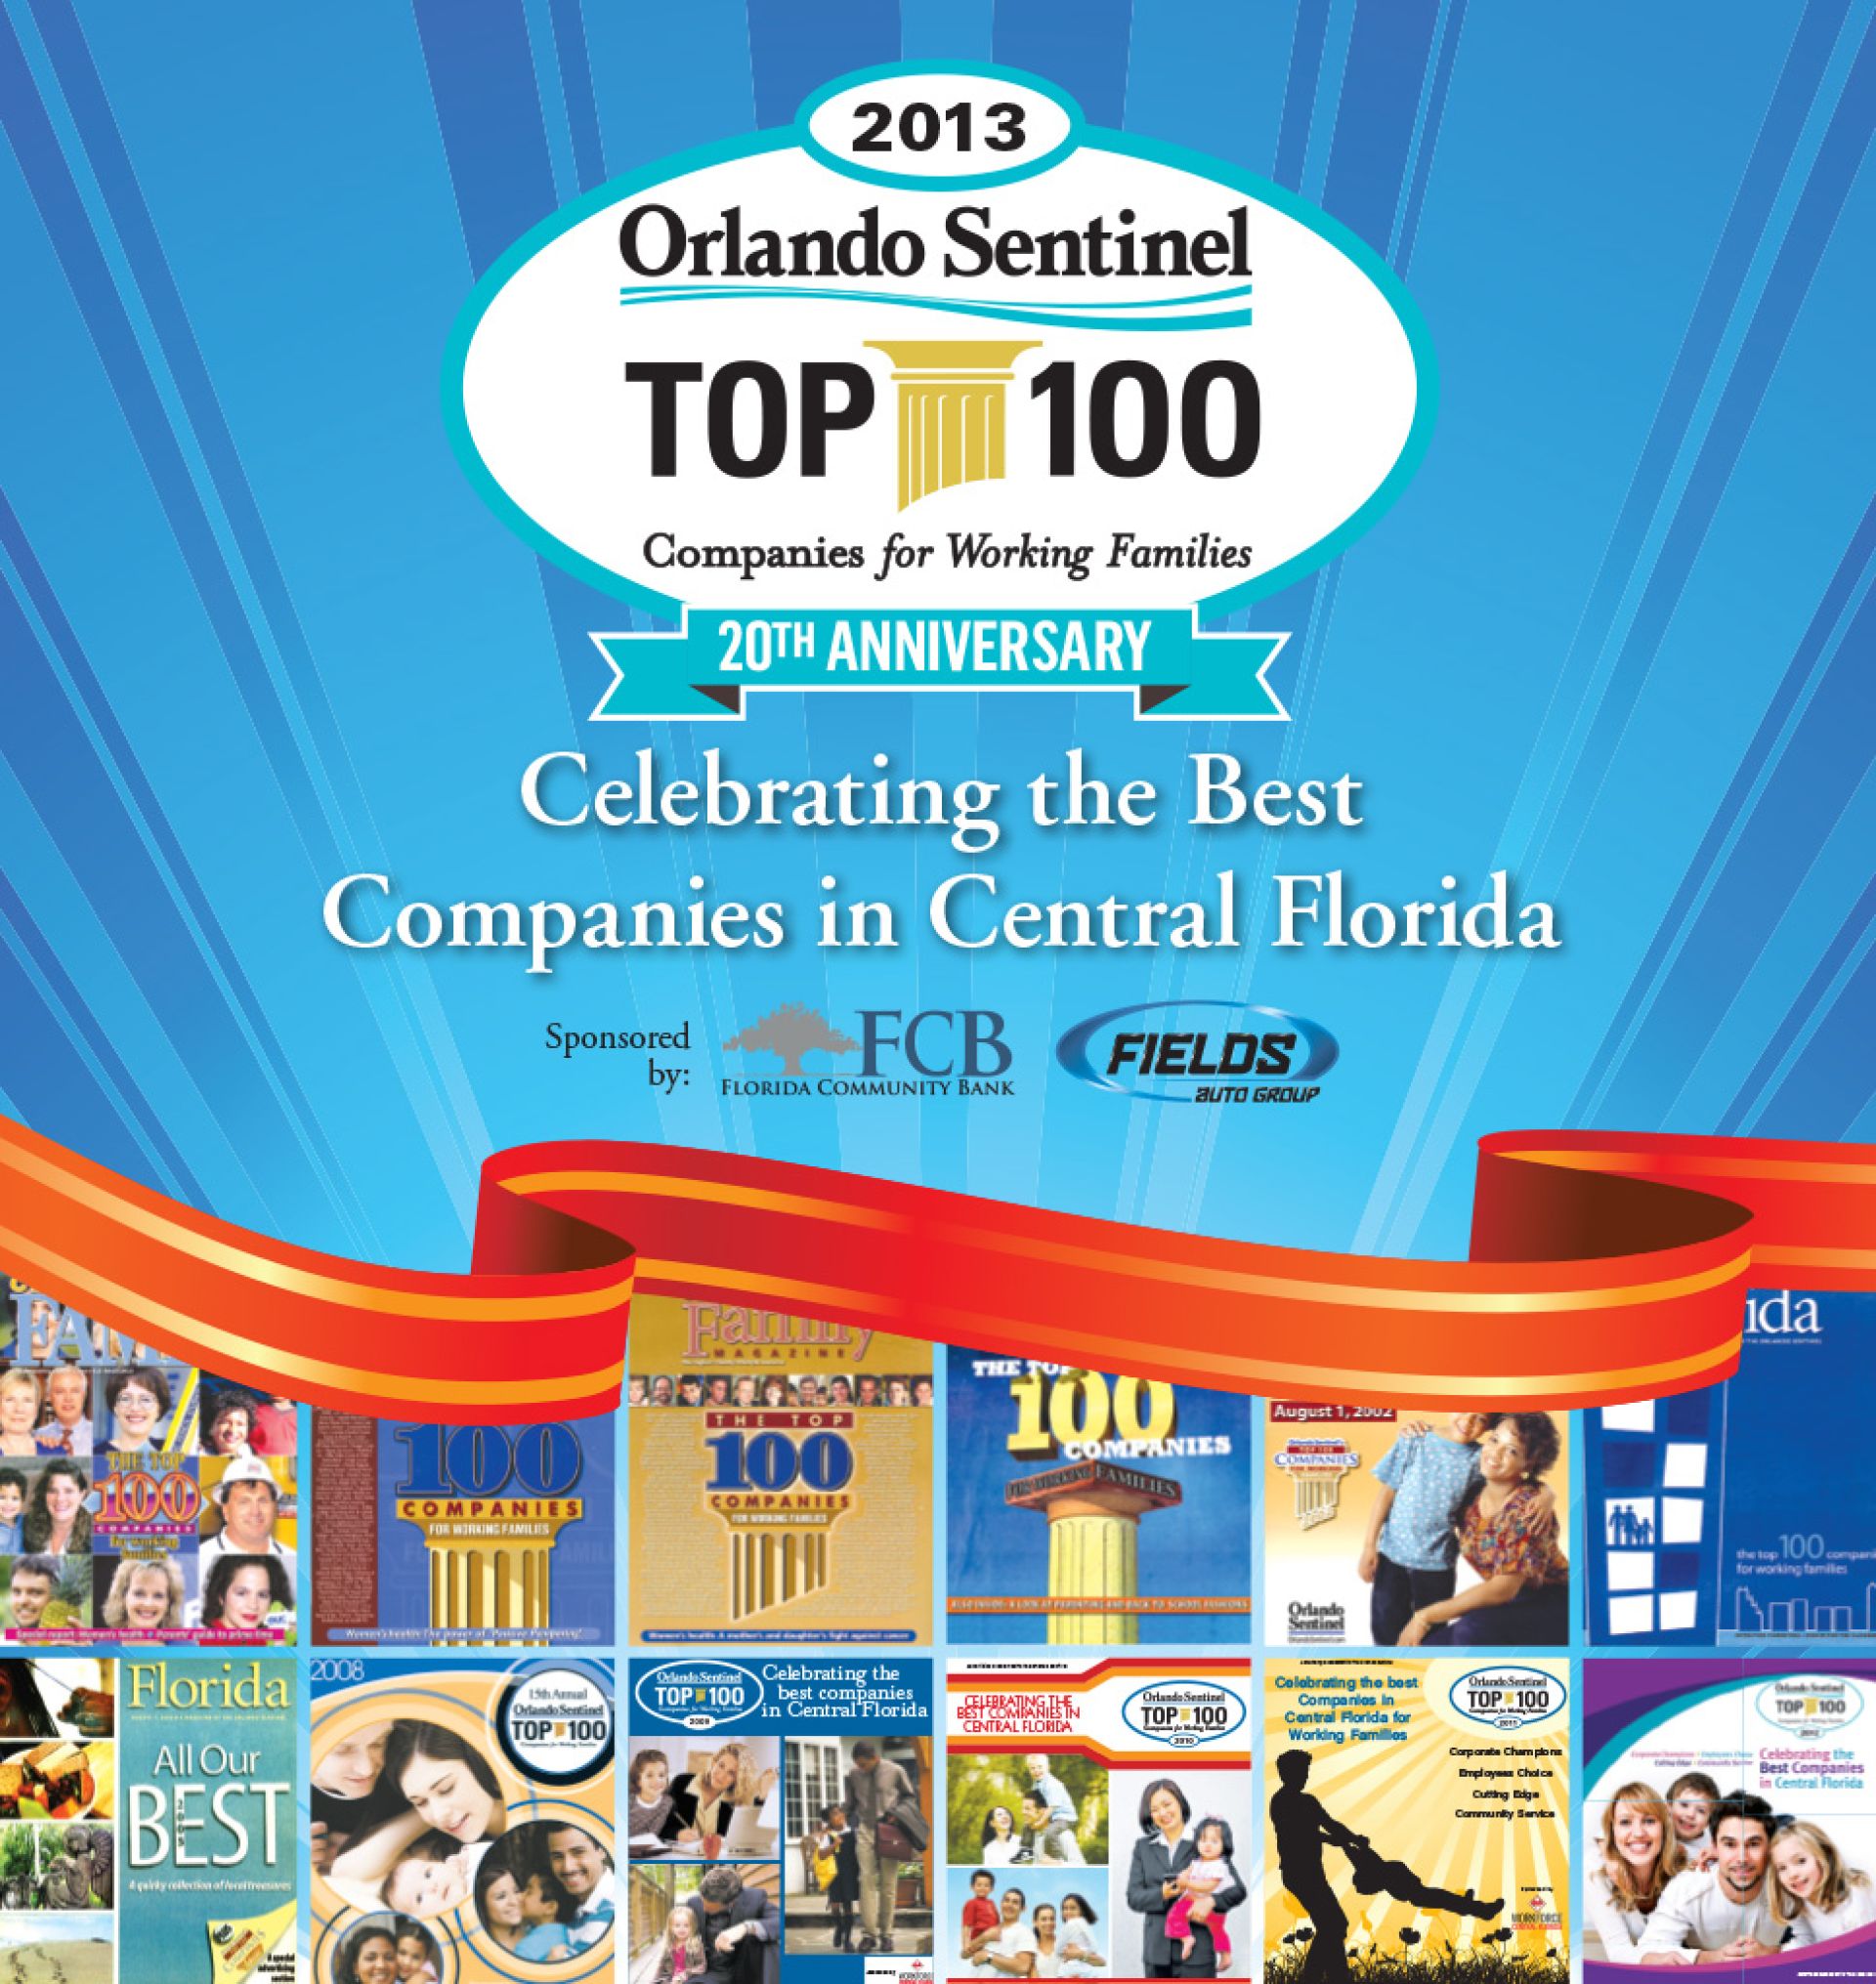 Top 100 Companies for Working Families cover